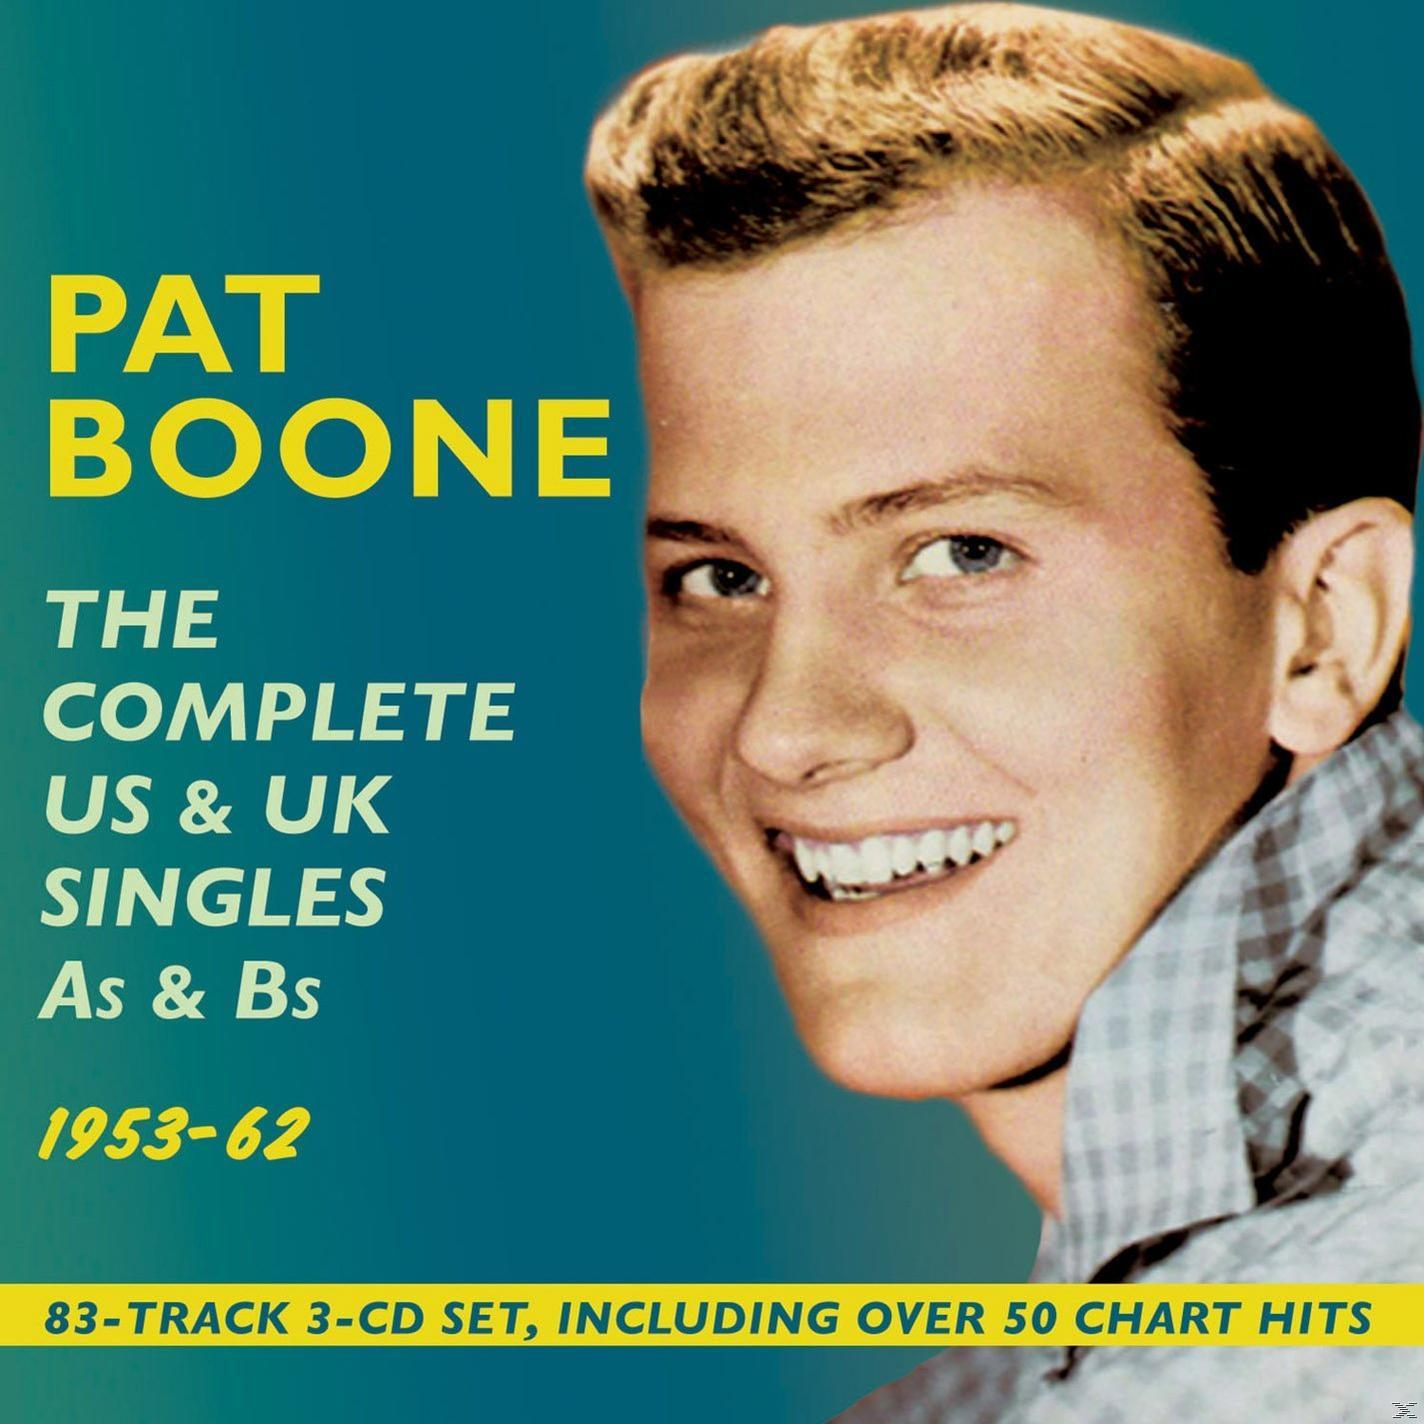 Pat Boone - The Complete & & Us As Uk Singles Bs - 1953-62 (CD)